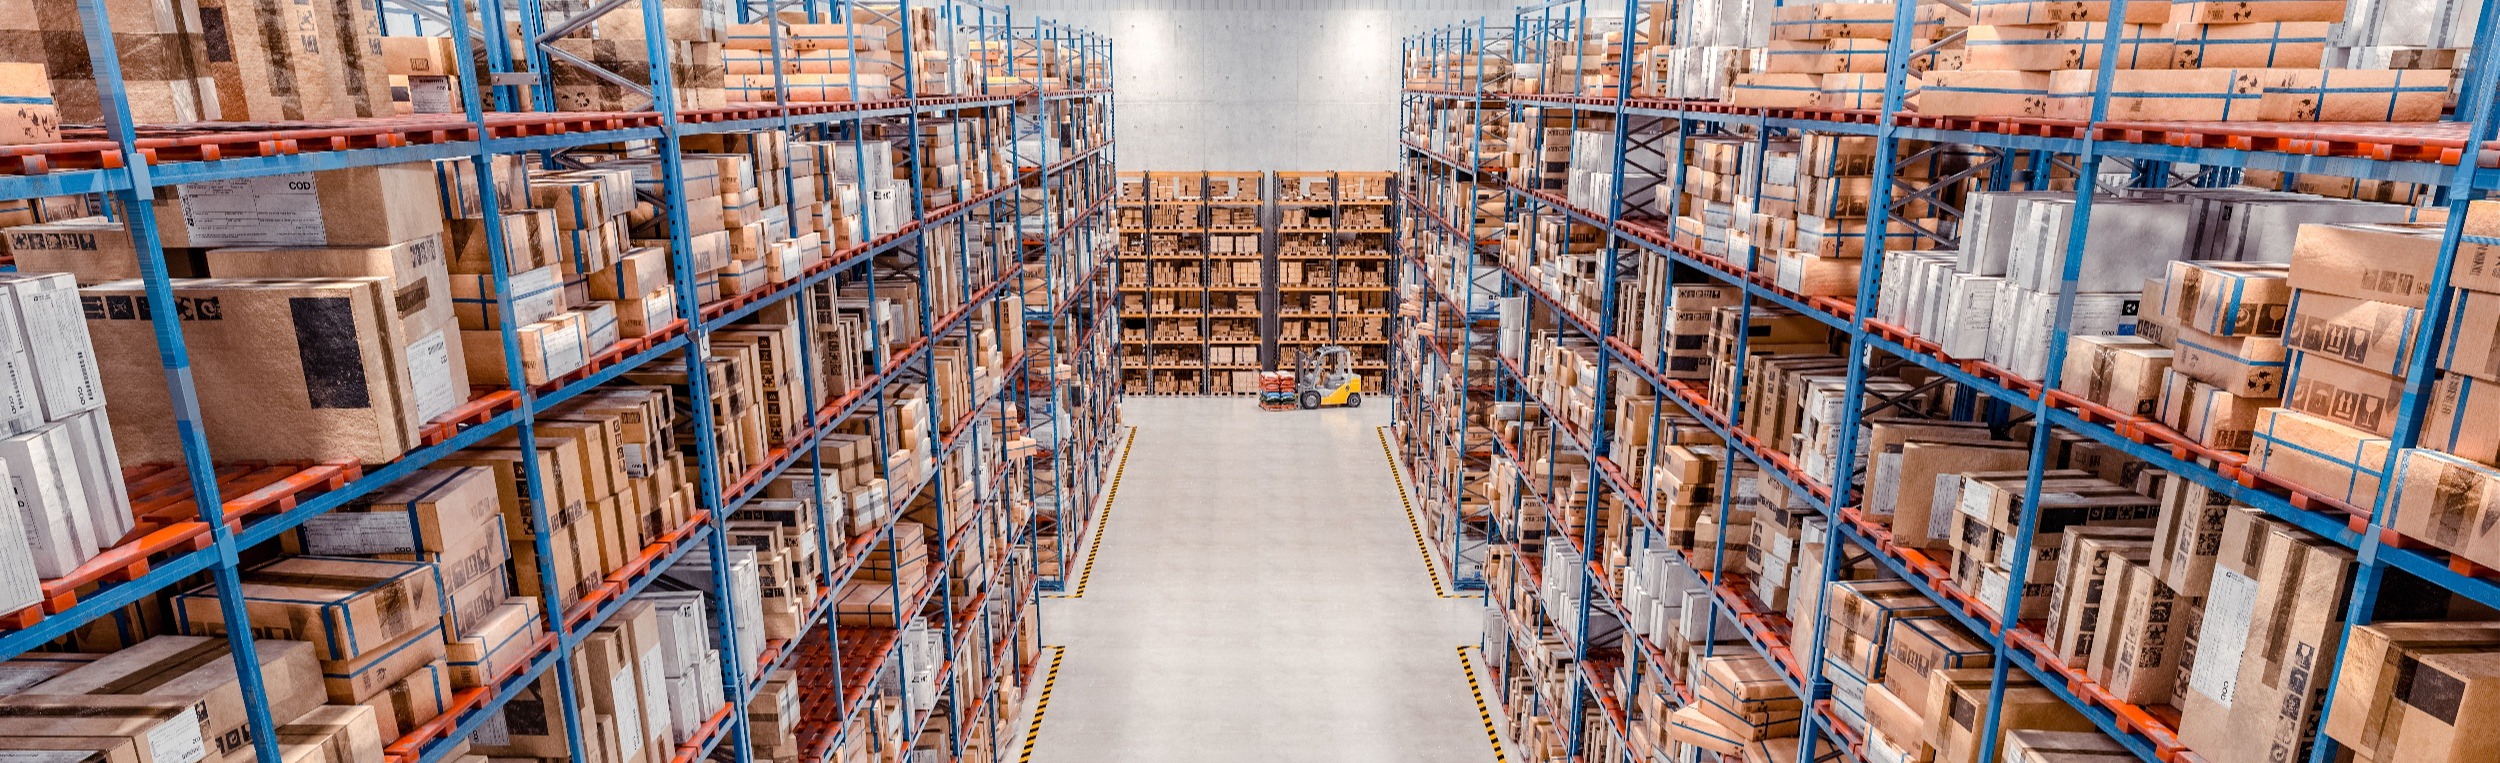 interior-large-warehouse-with-very-high-shelves-lifting-equipment-action (1)-1